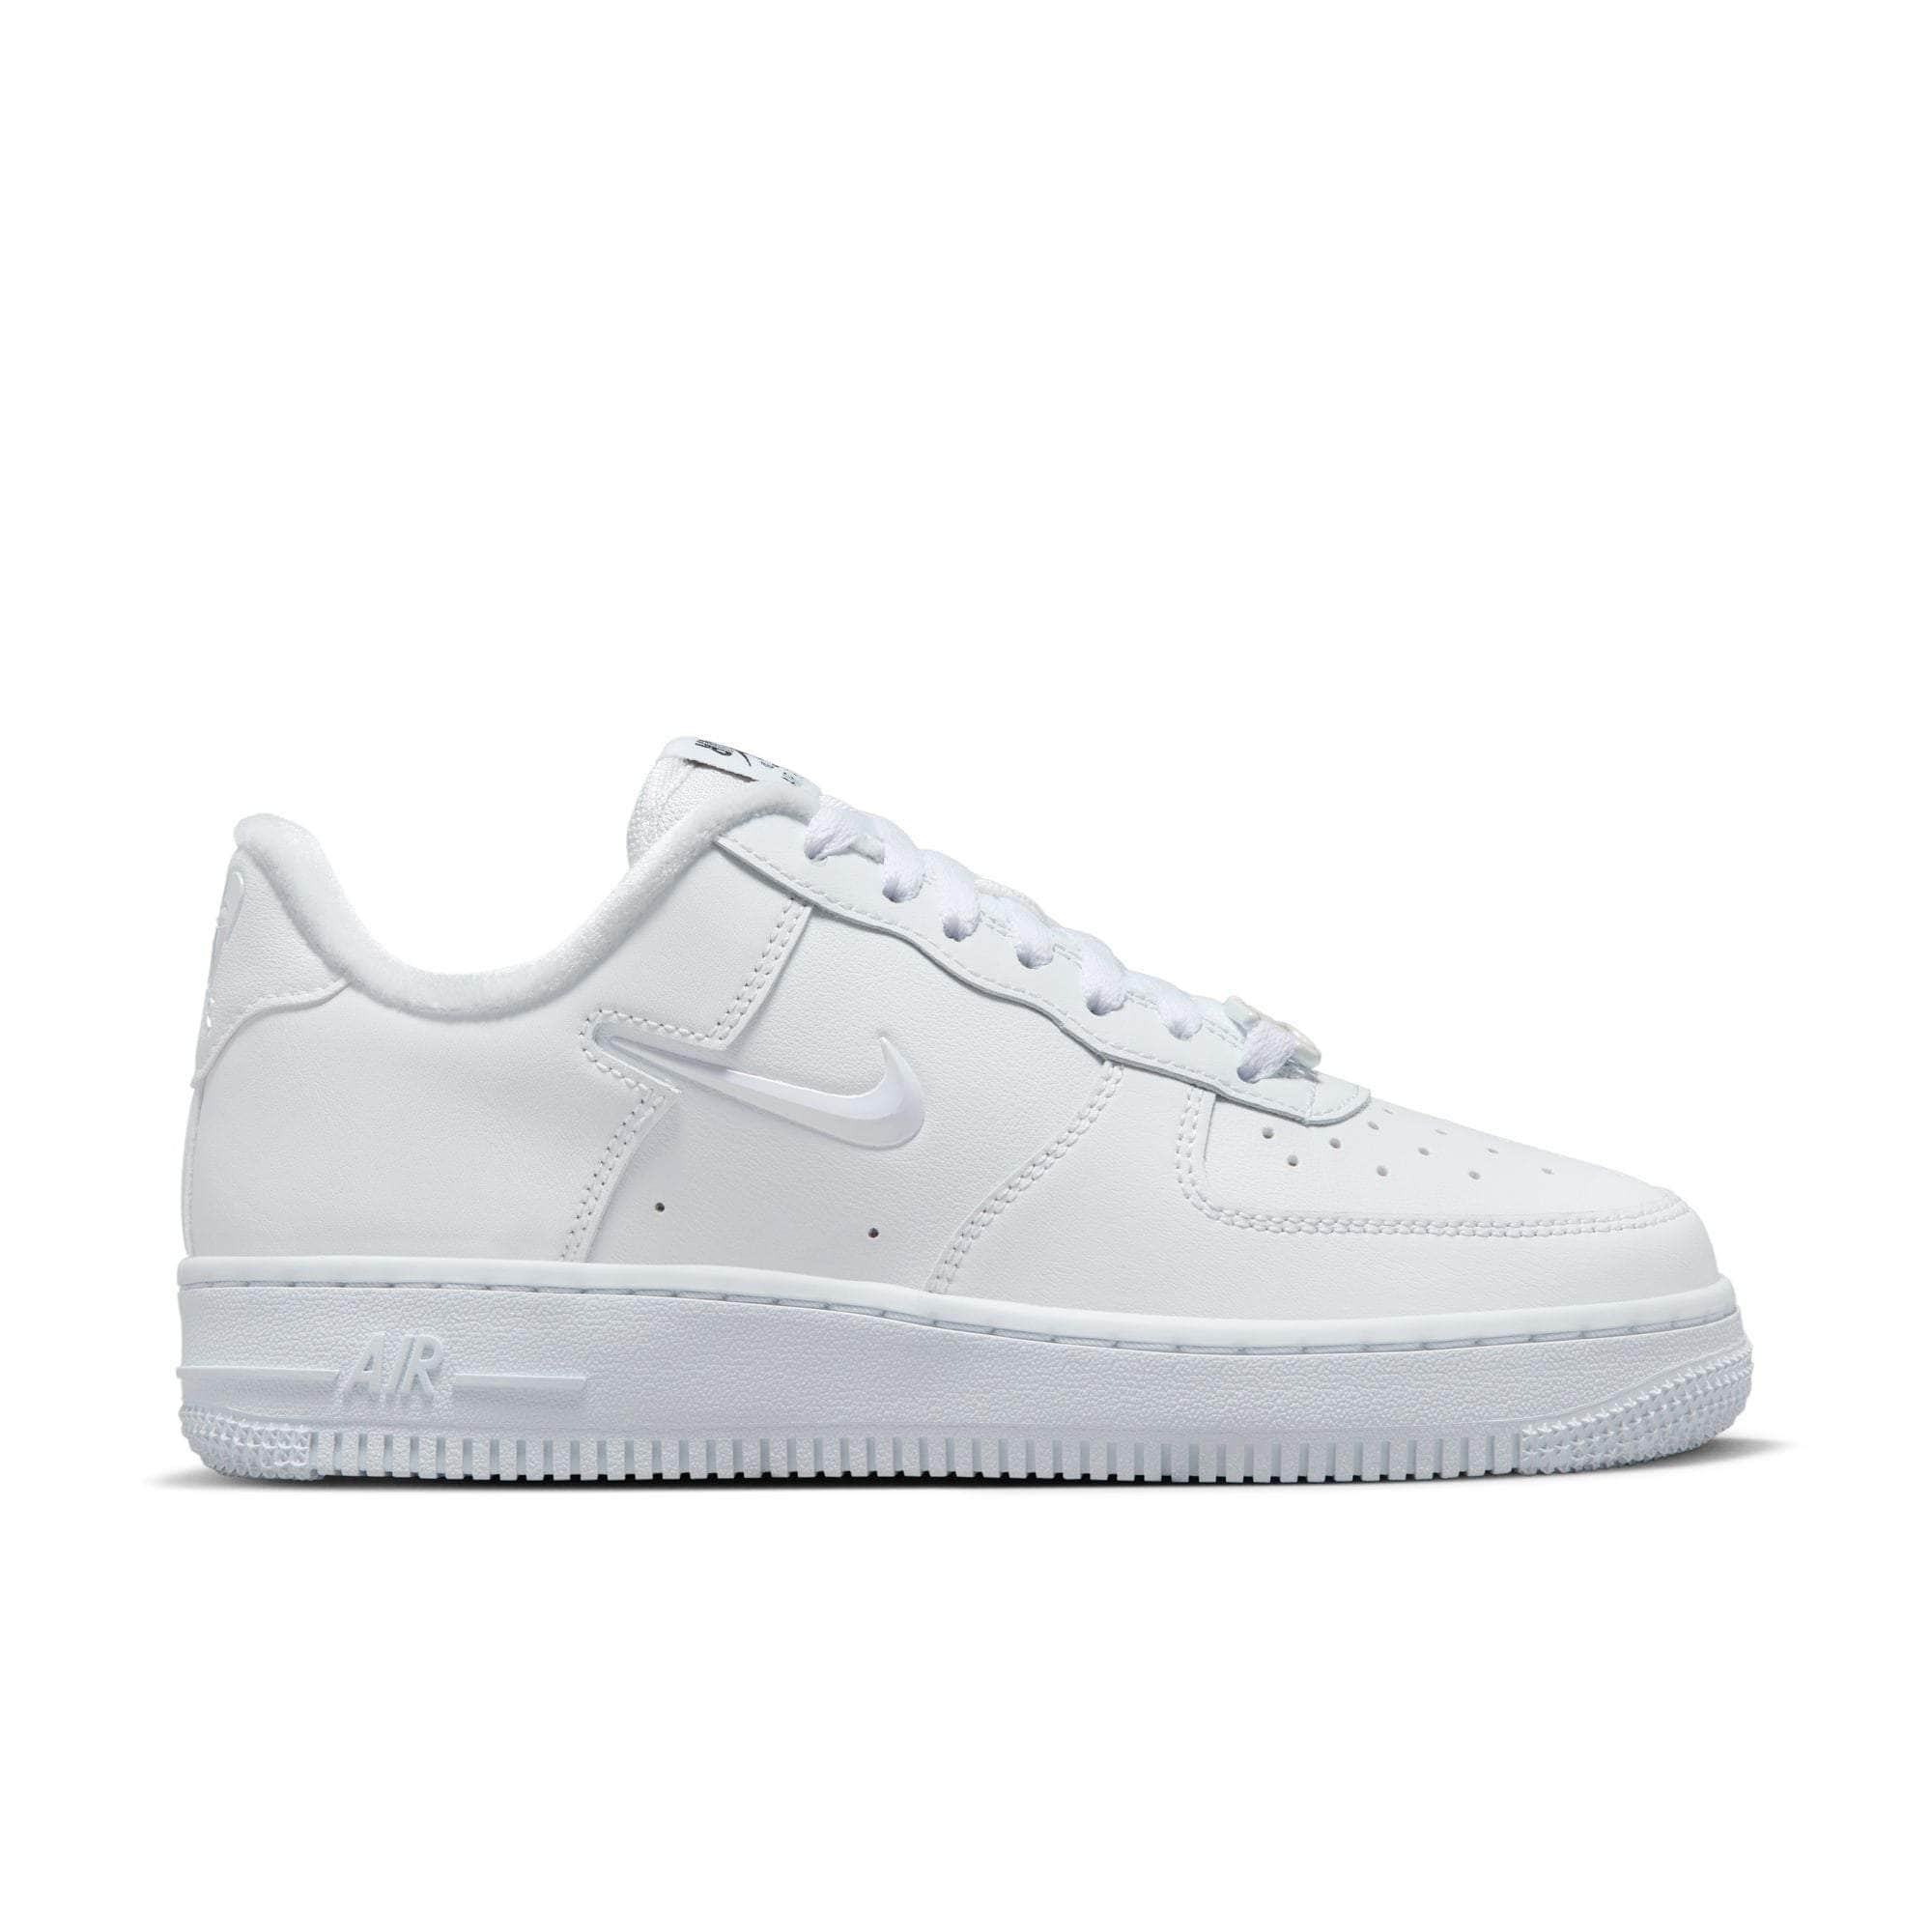 Nike Air Force 1 '07 SE - Women's - GBNY